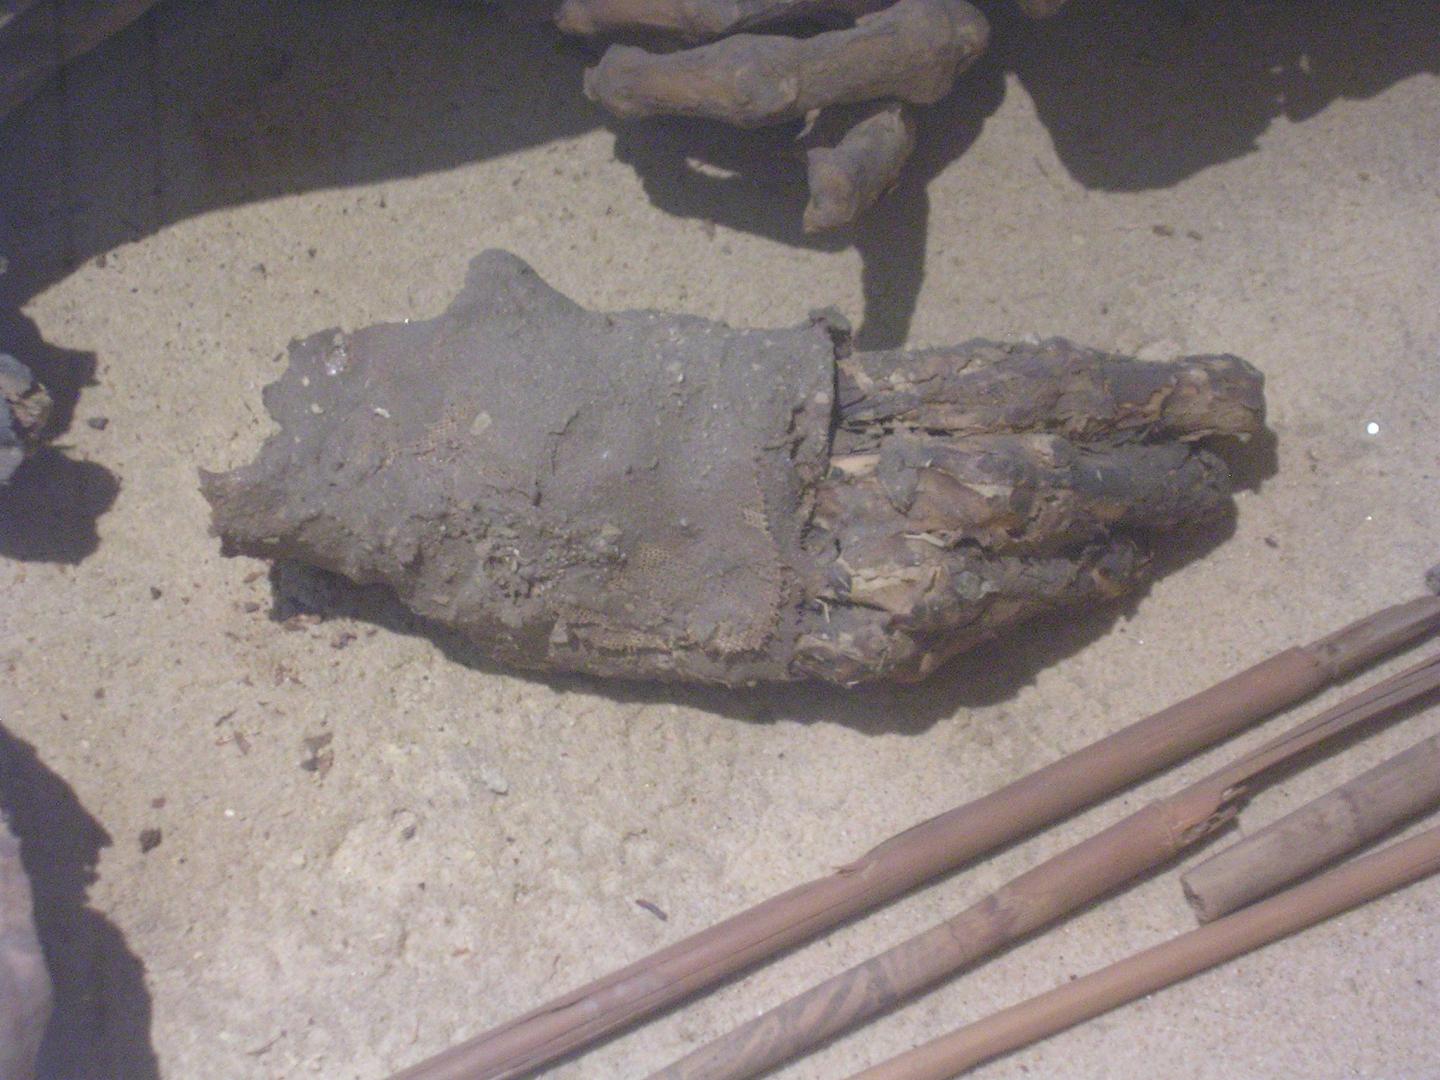 Prehistoric Mummy Reveals Ancient Egyptian Embalming 'recipe' Was around for Millennia